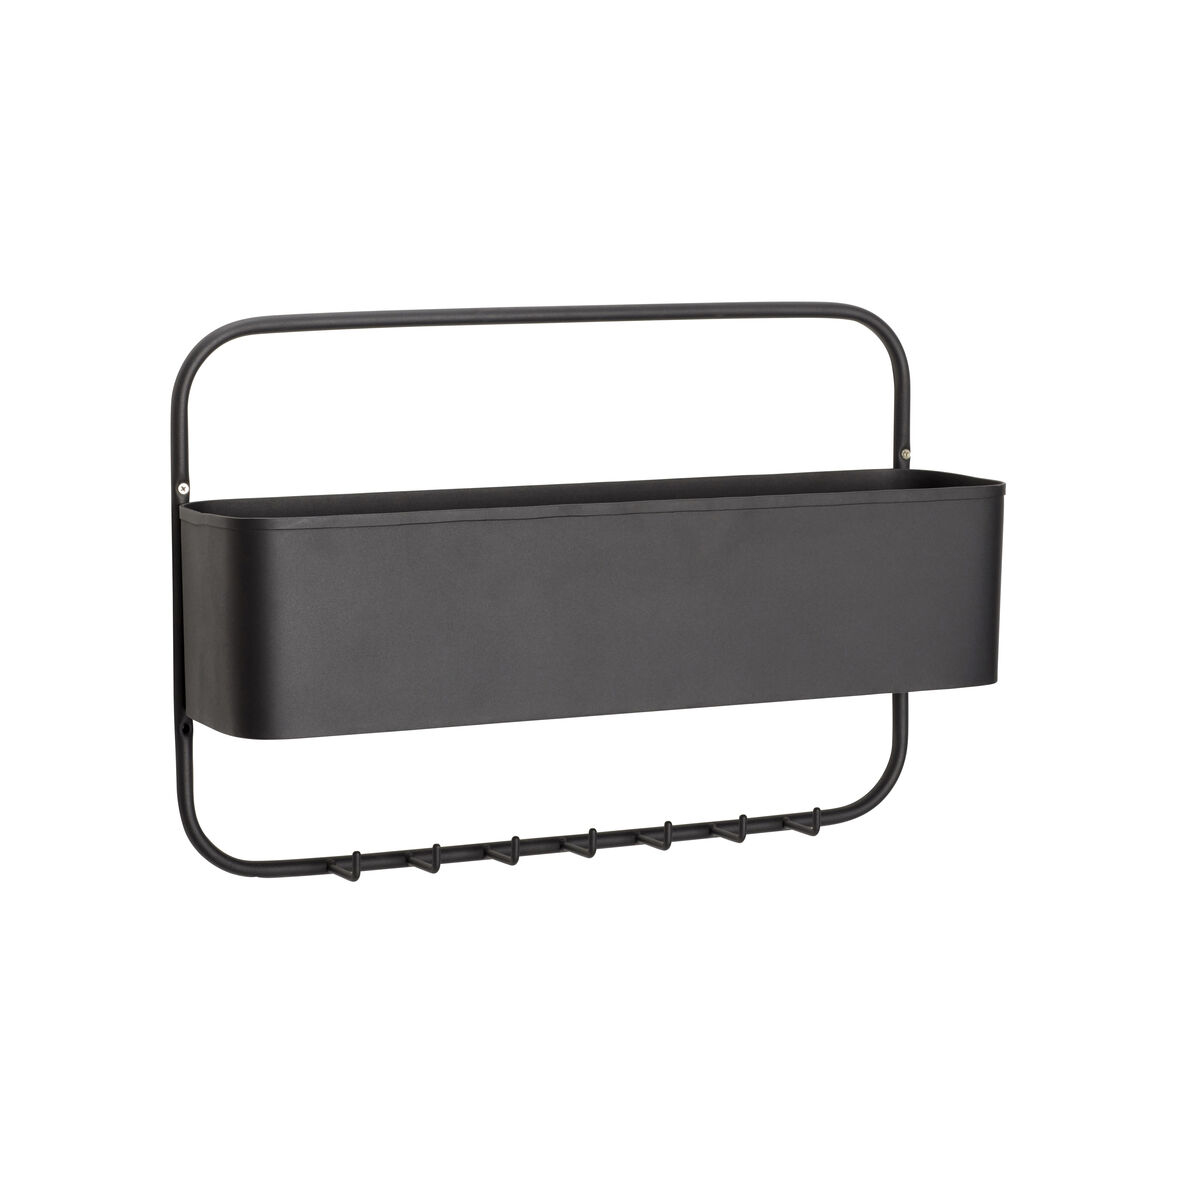 Hubsch Black Coat Hanger Wall Hook with Storage Container